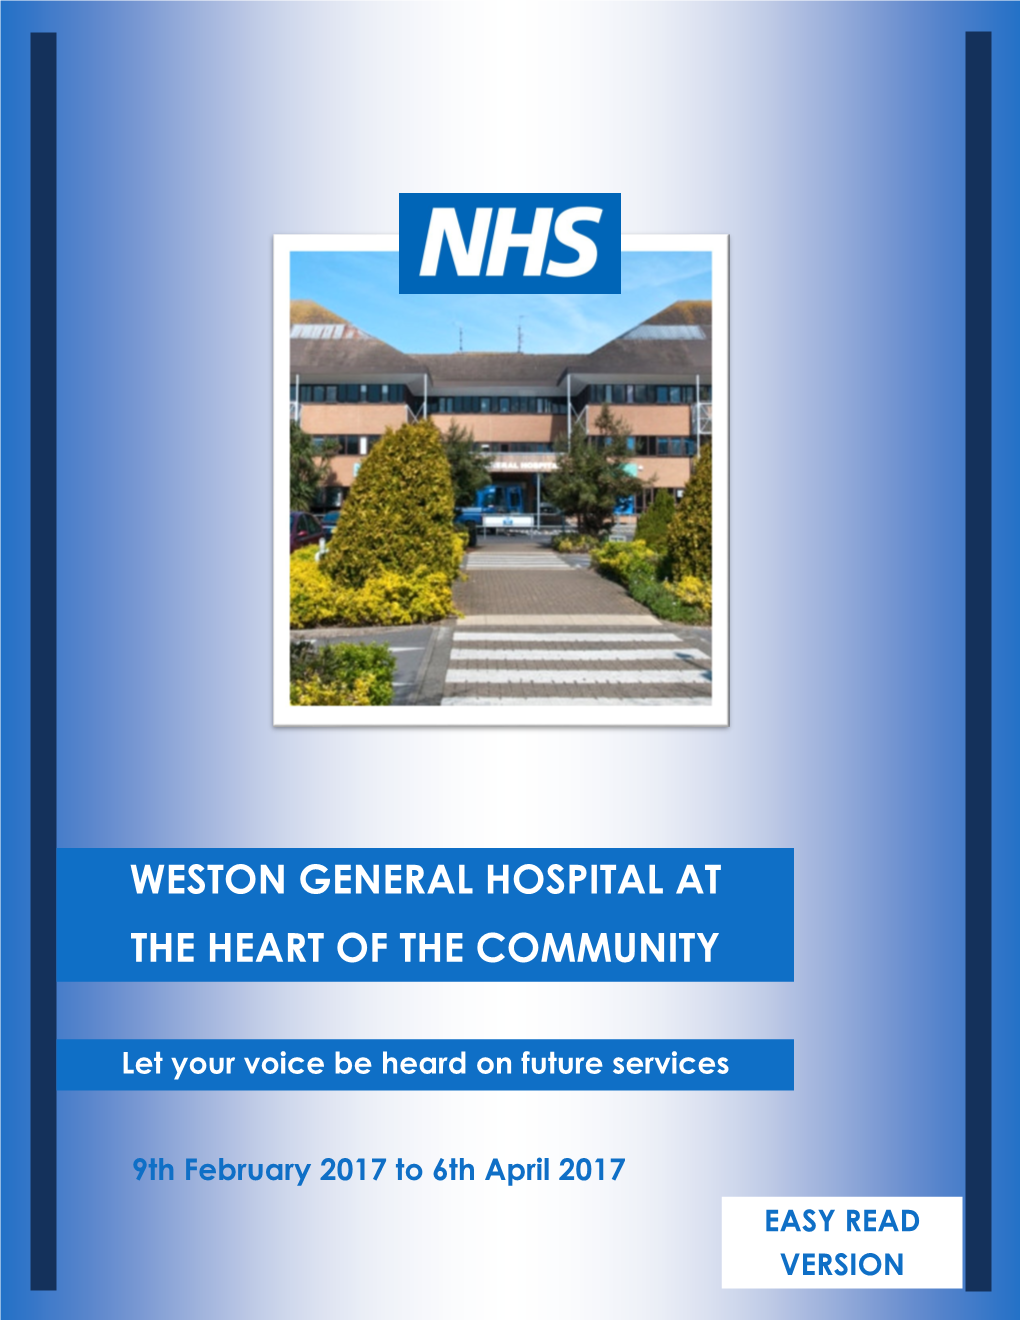 Weston General Hospital at the Heart of the Community